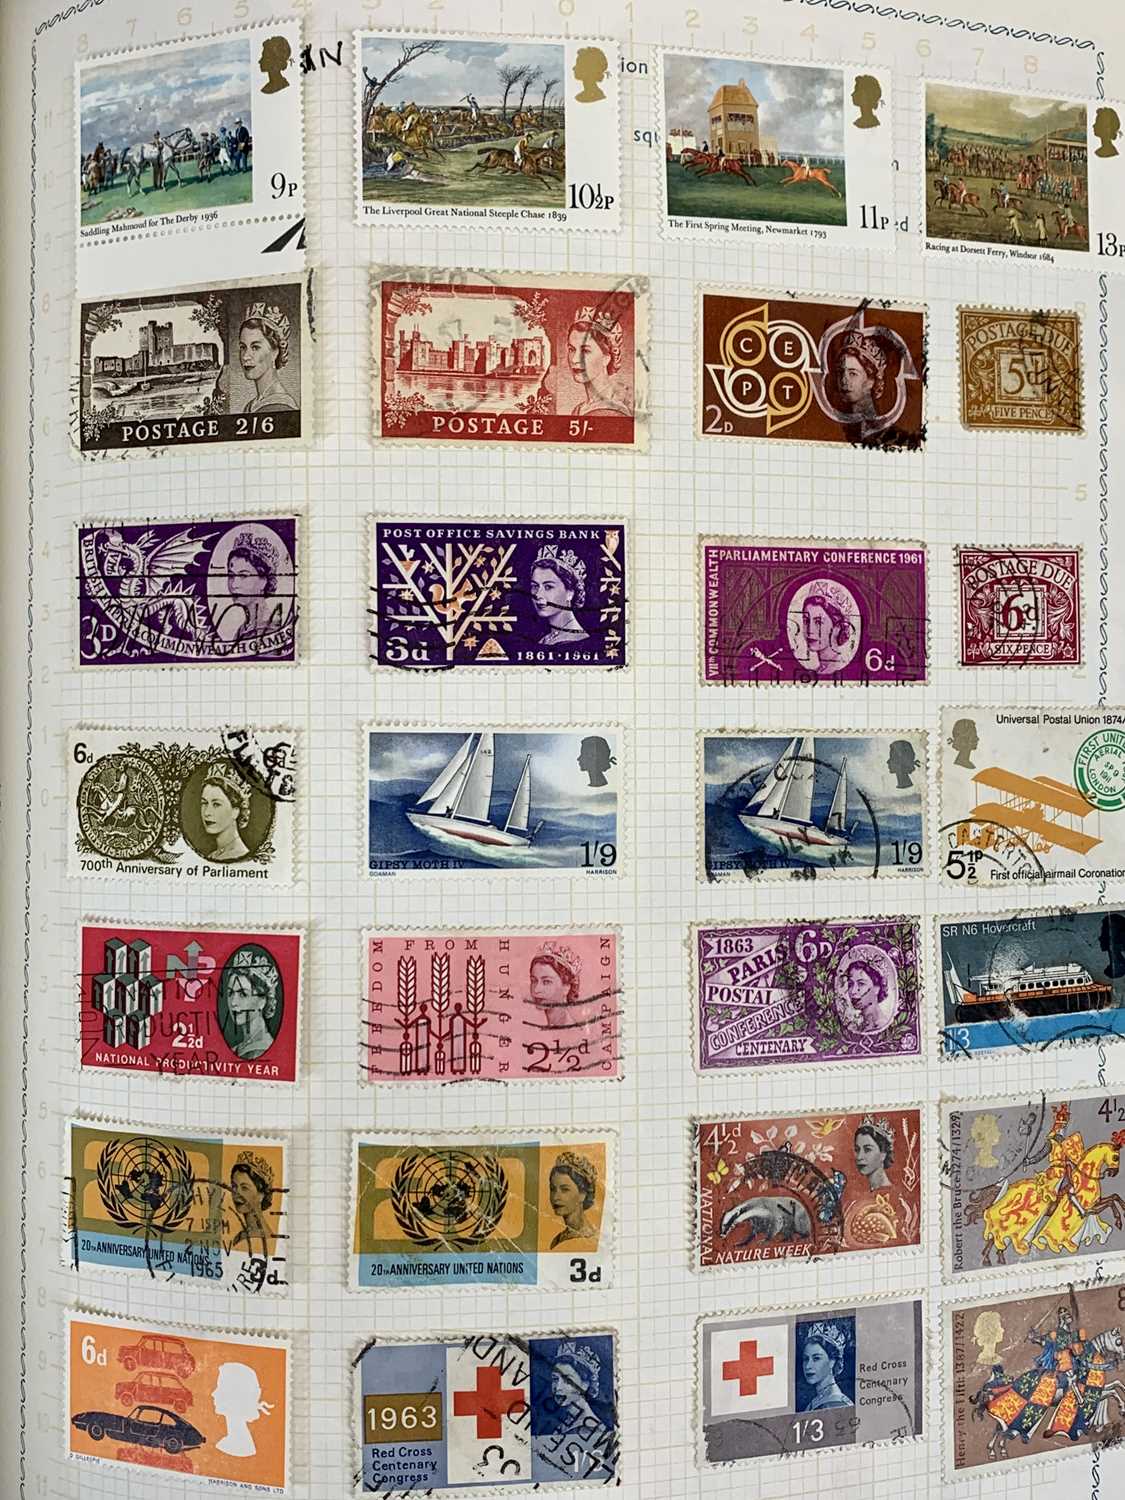 STAMPS - 'The Freelance Stamp Album' containing a well presented collection of British and - Image 9 of 11